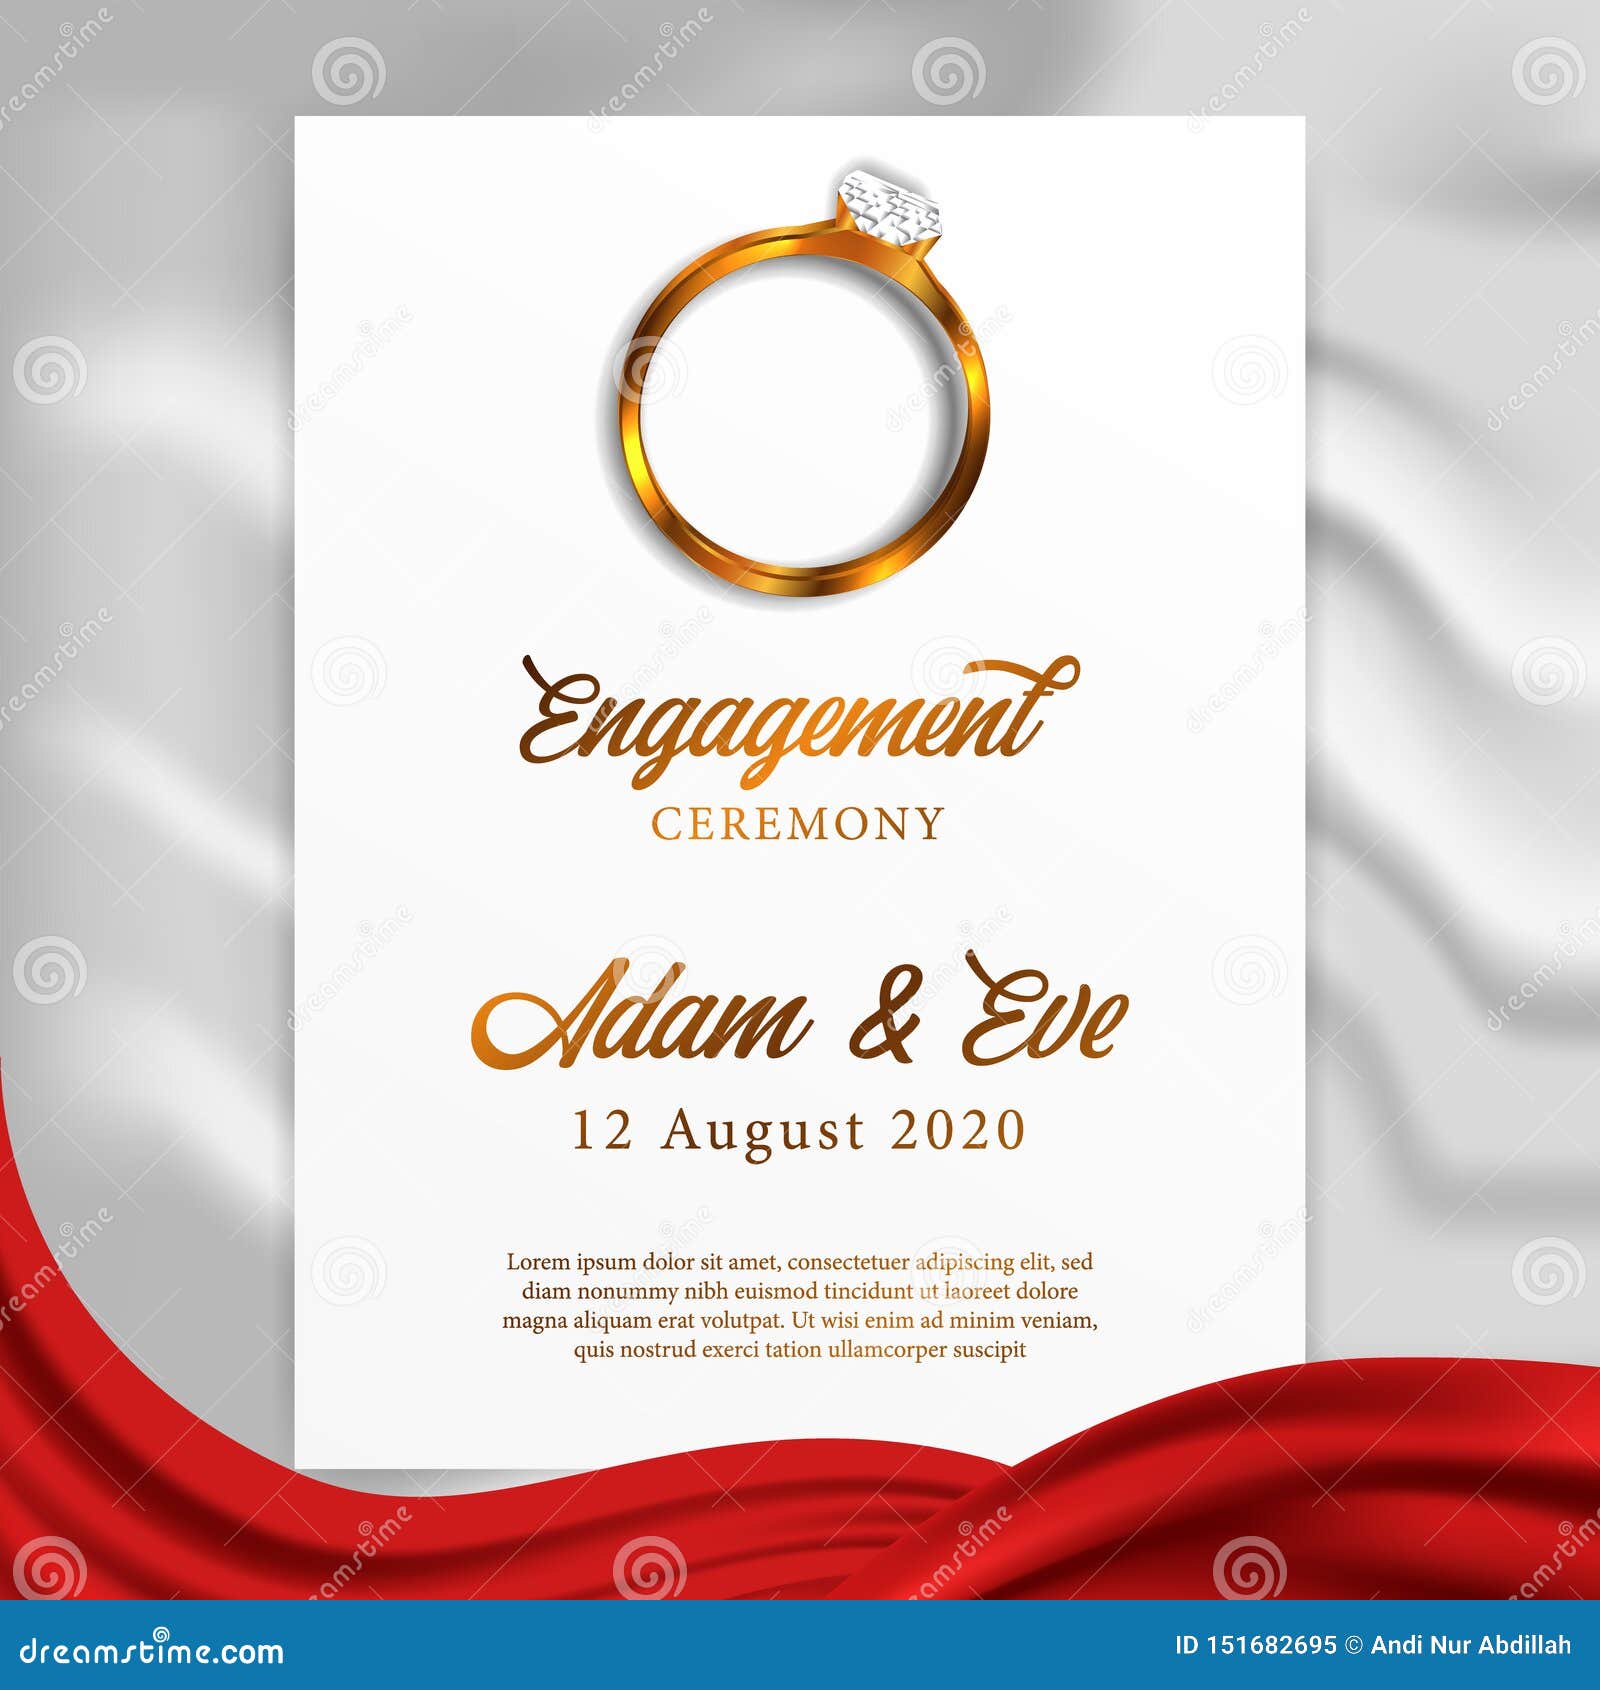 ring engagement wedding jewel diamond top view white texture blanket paper ring engagement wedding jewel diamond top view 151682695